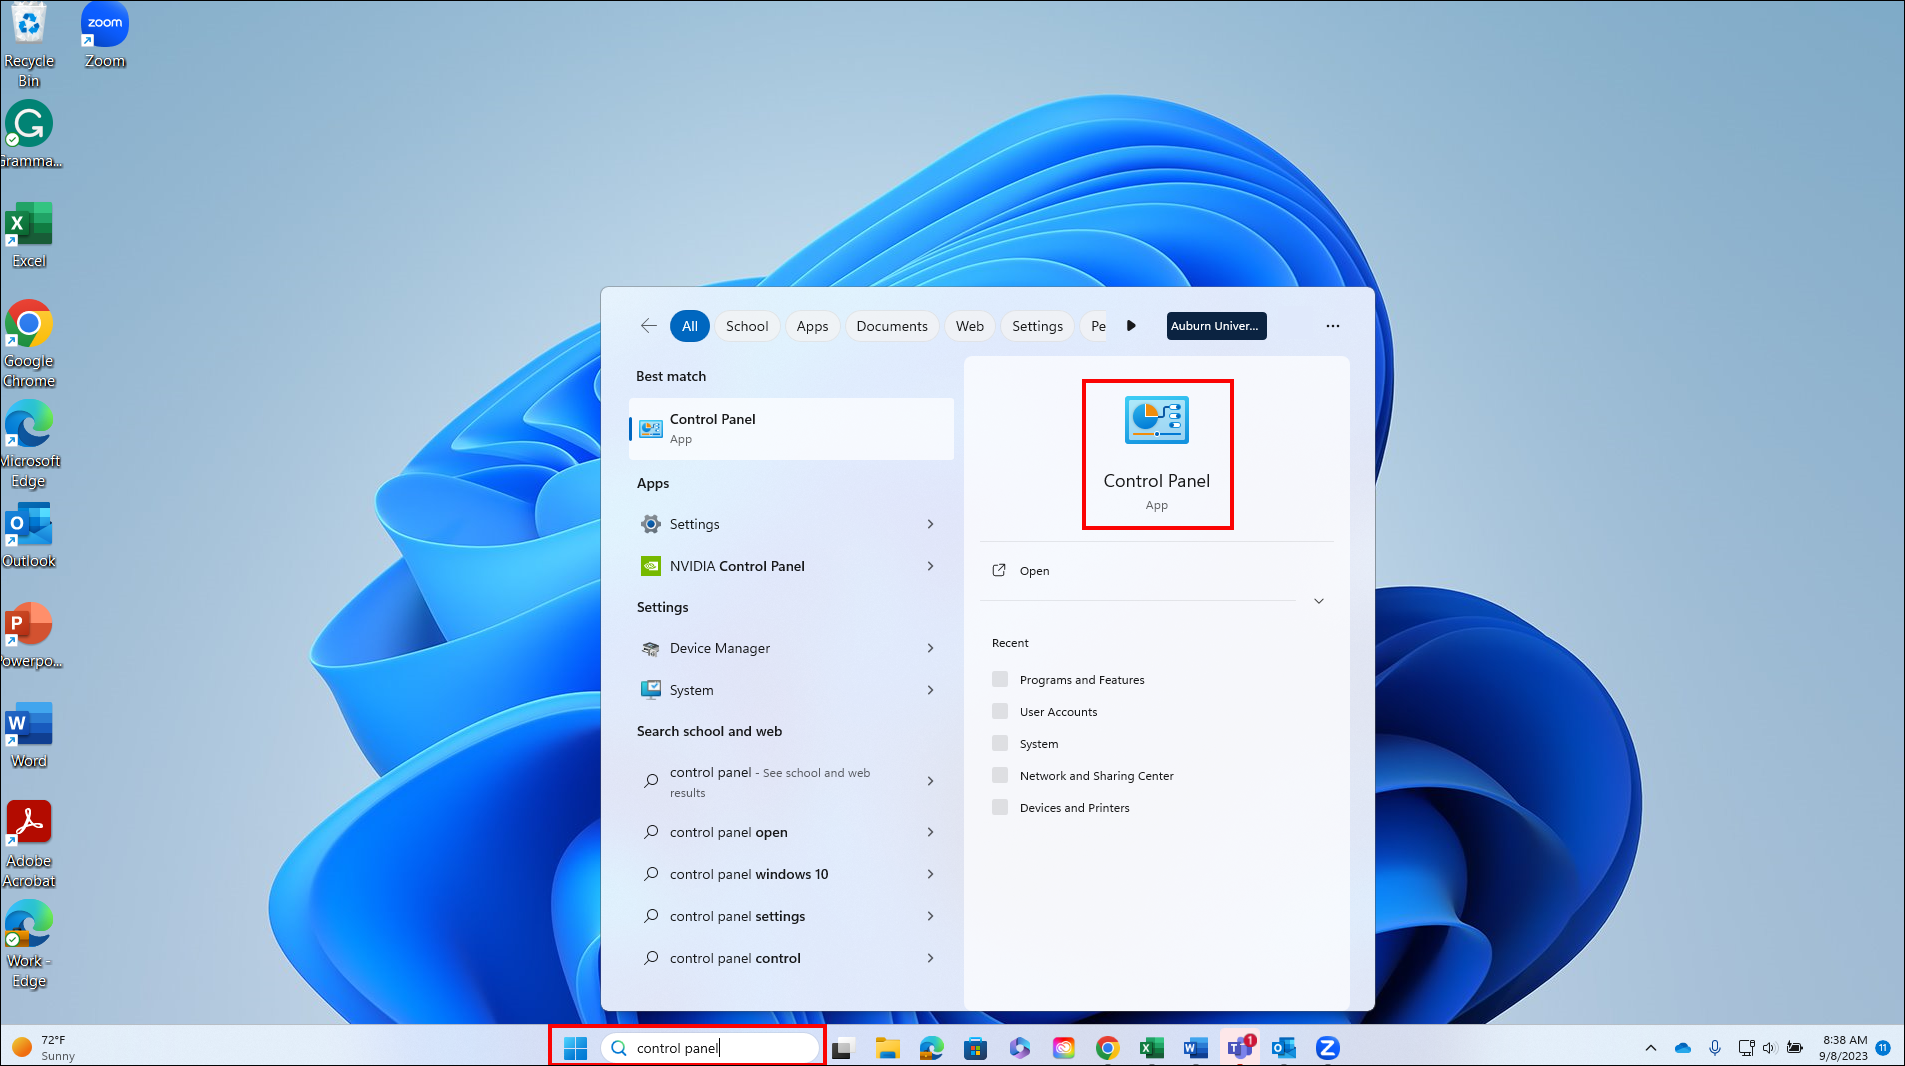 Download a VPN for Windows PC in 2023